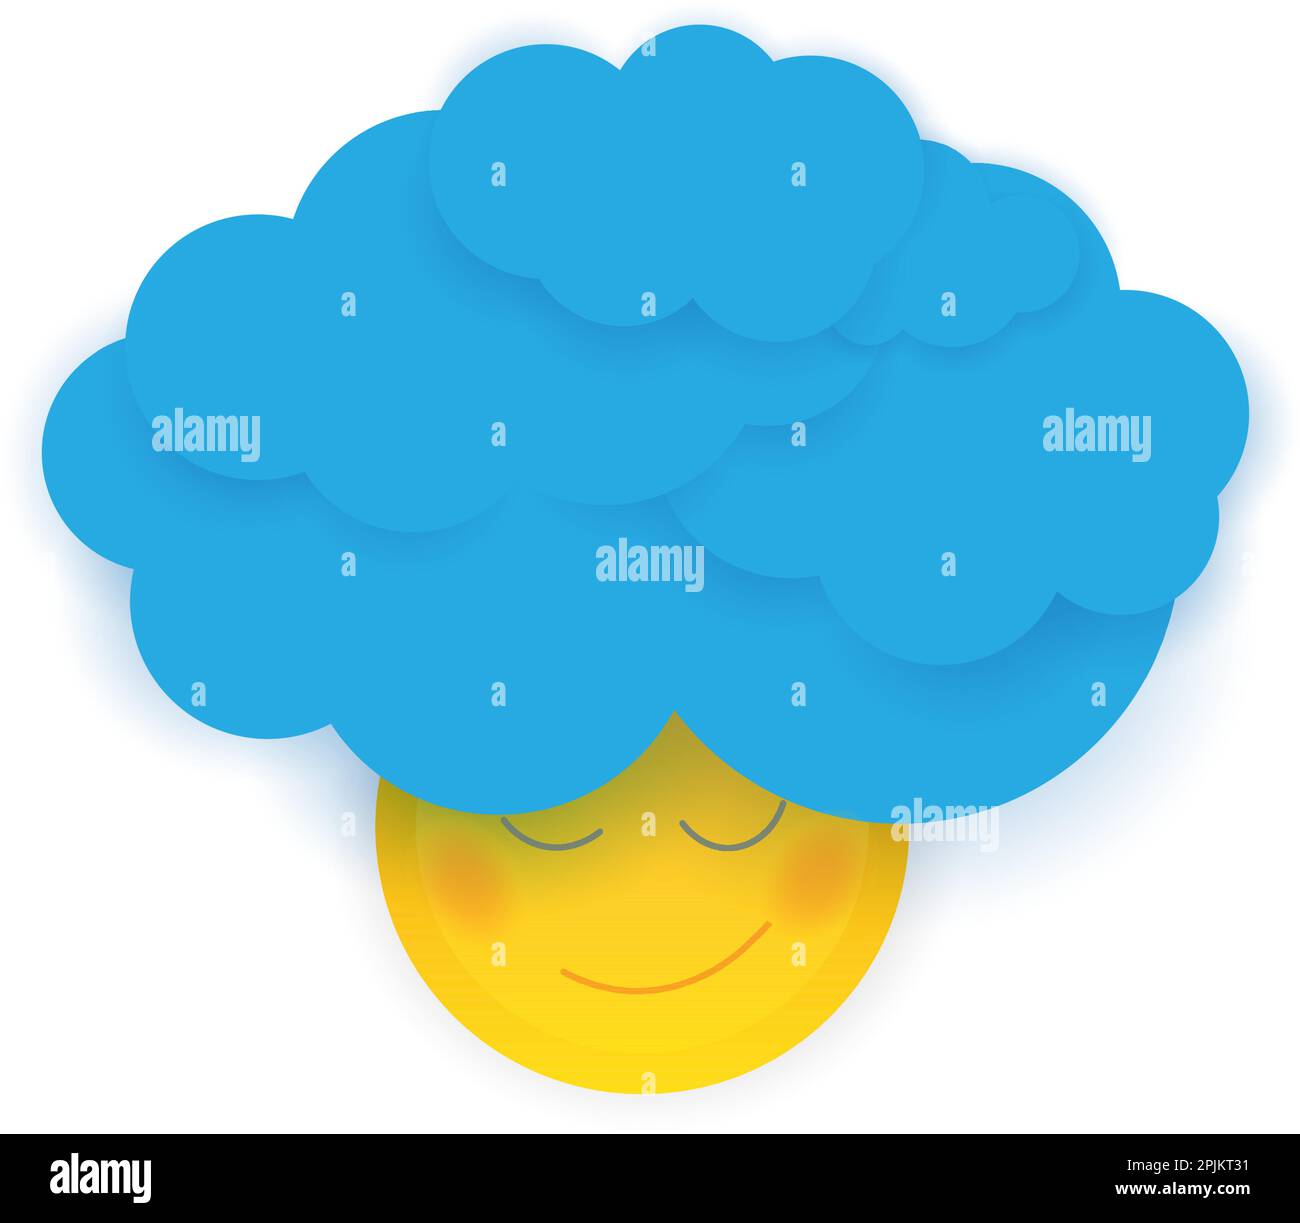 Smiling sun character with curly hair made of blue clouds. Illustration that demonstrate positive emotions and energy. Paper cut style vector illustra Stock Vector